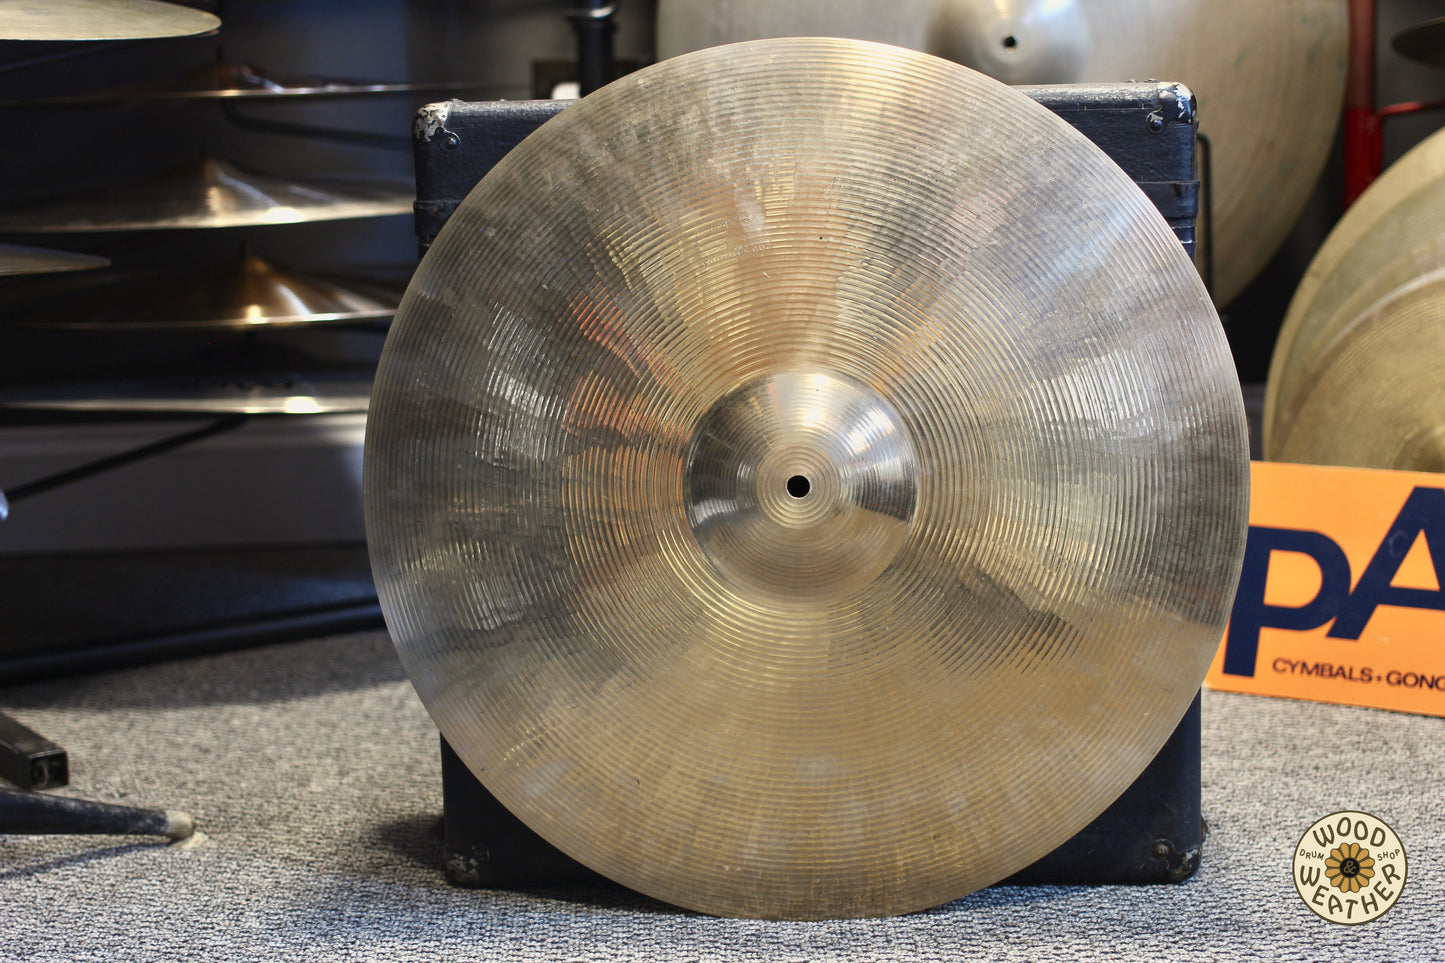 1960s Paiste 20" Formula 602 "Solid Stamp" Ride Cymbal 2410g